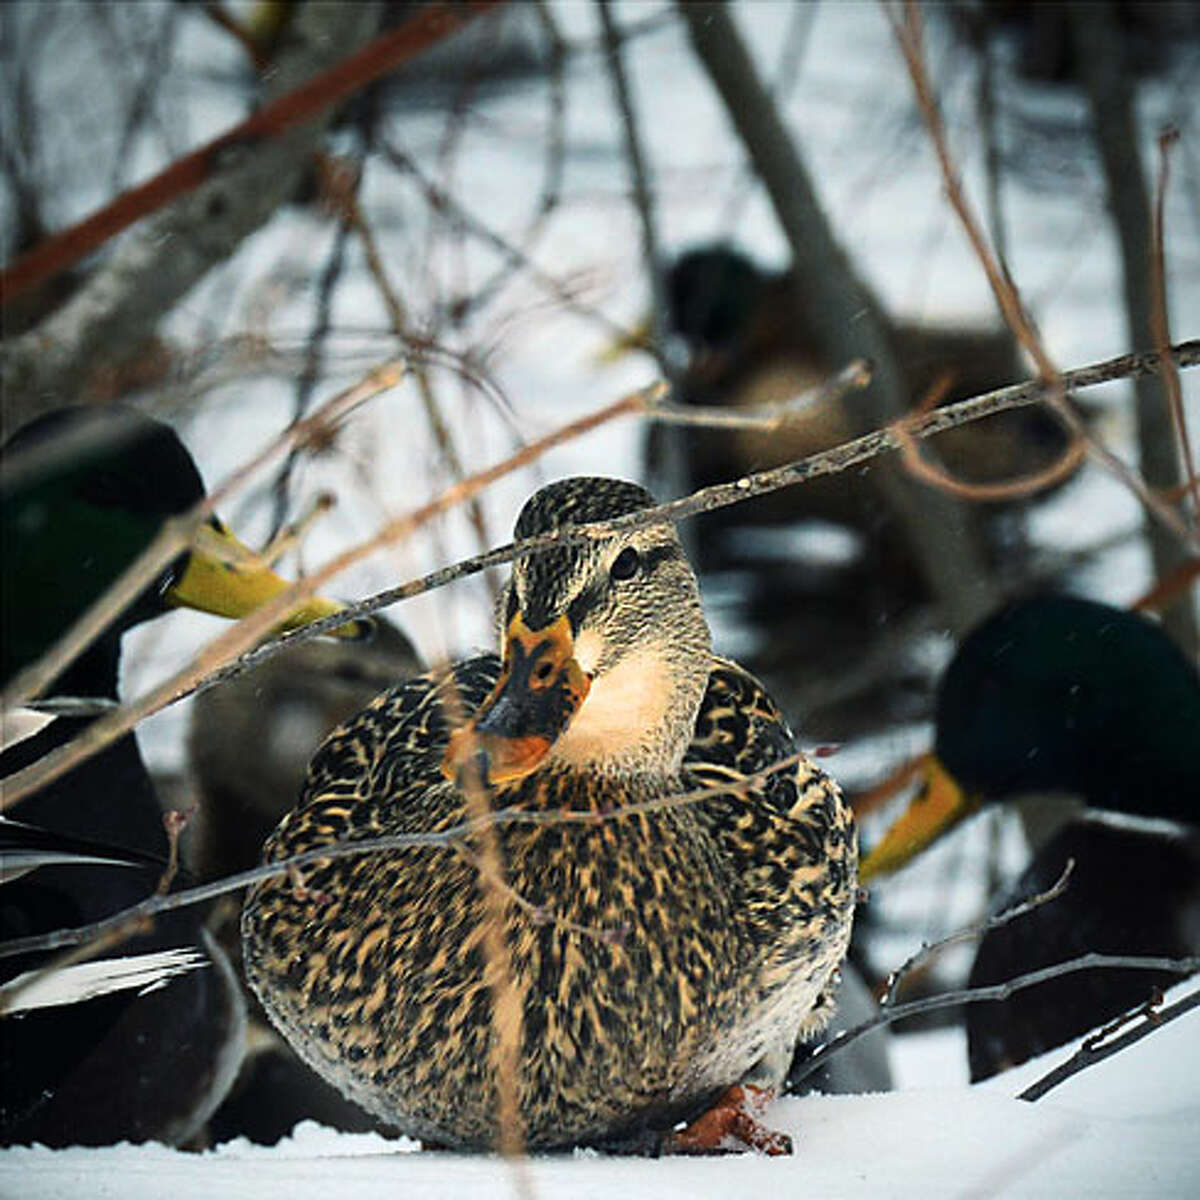 Old Mine Park Ducks at a Low Angle by Luca Pietrangeli won first place in the "Trumbull Wildlife in Winter" category.